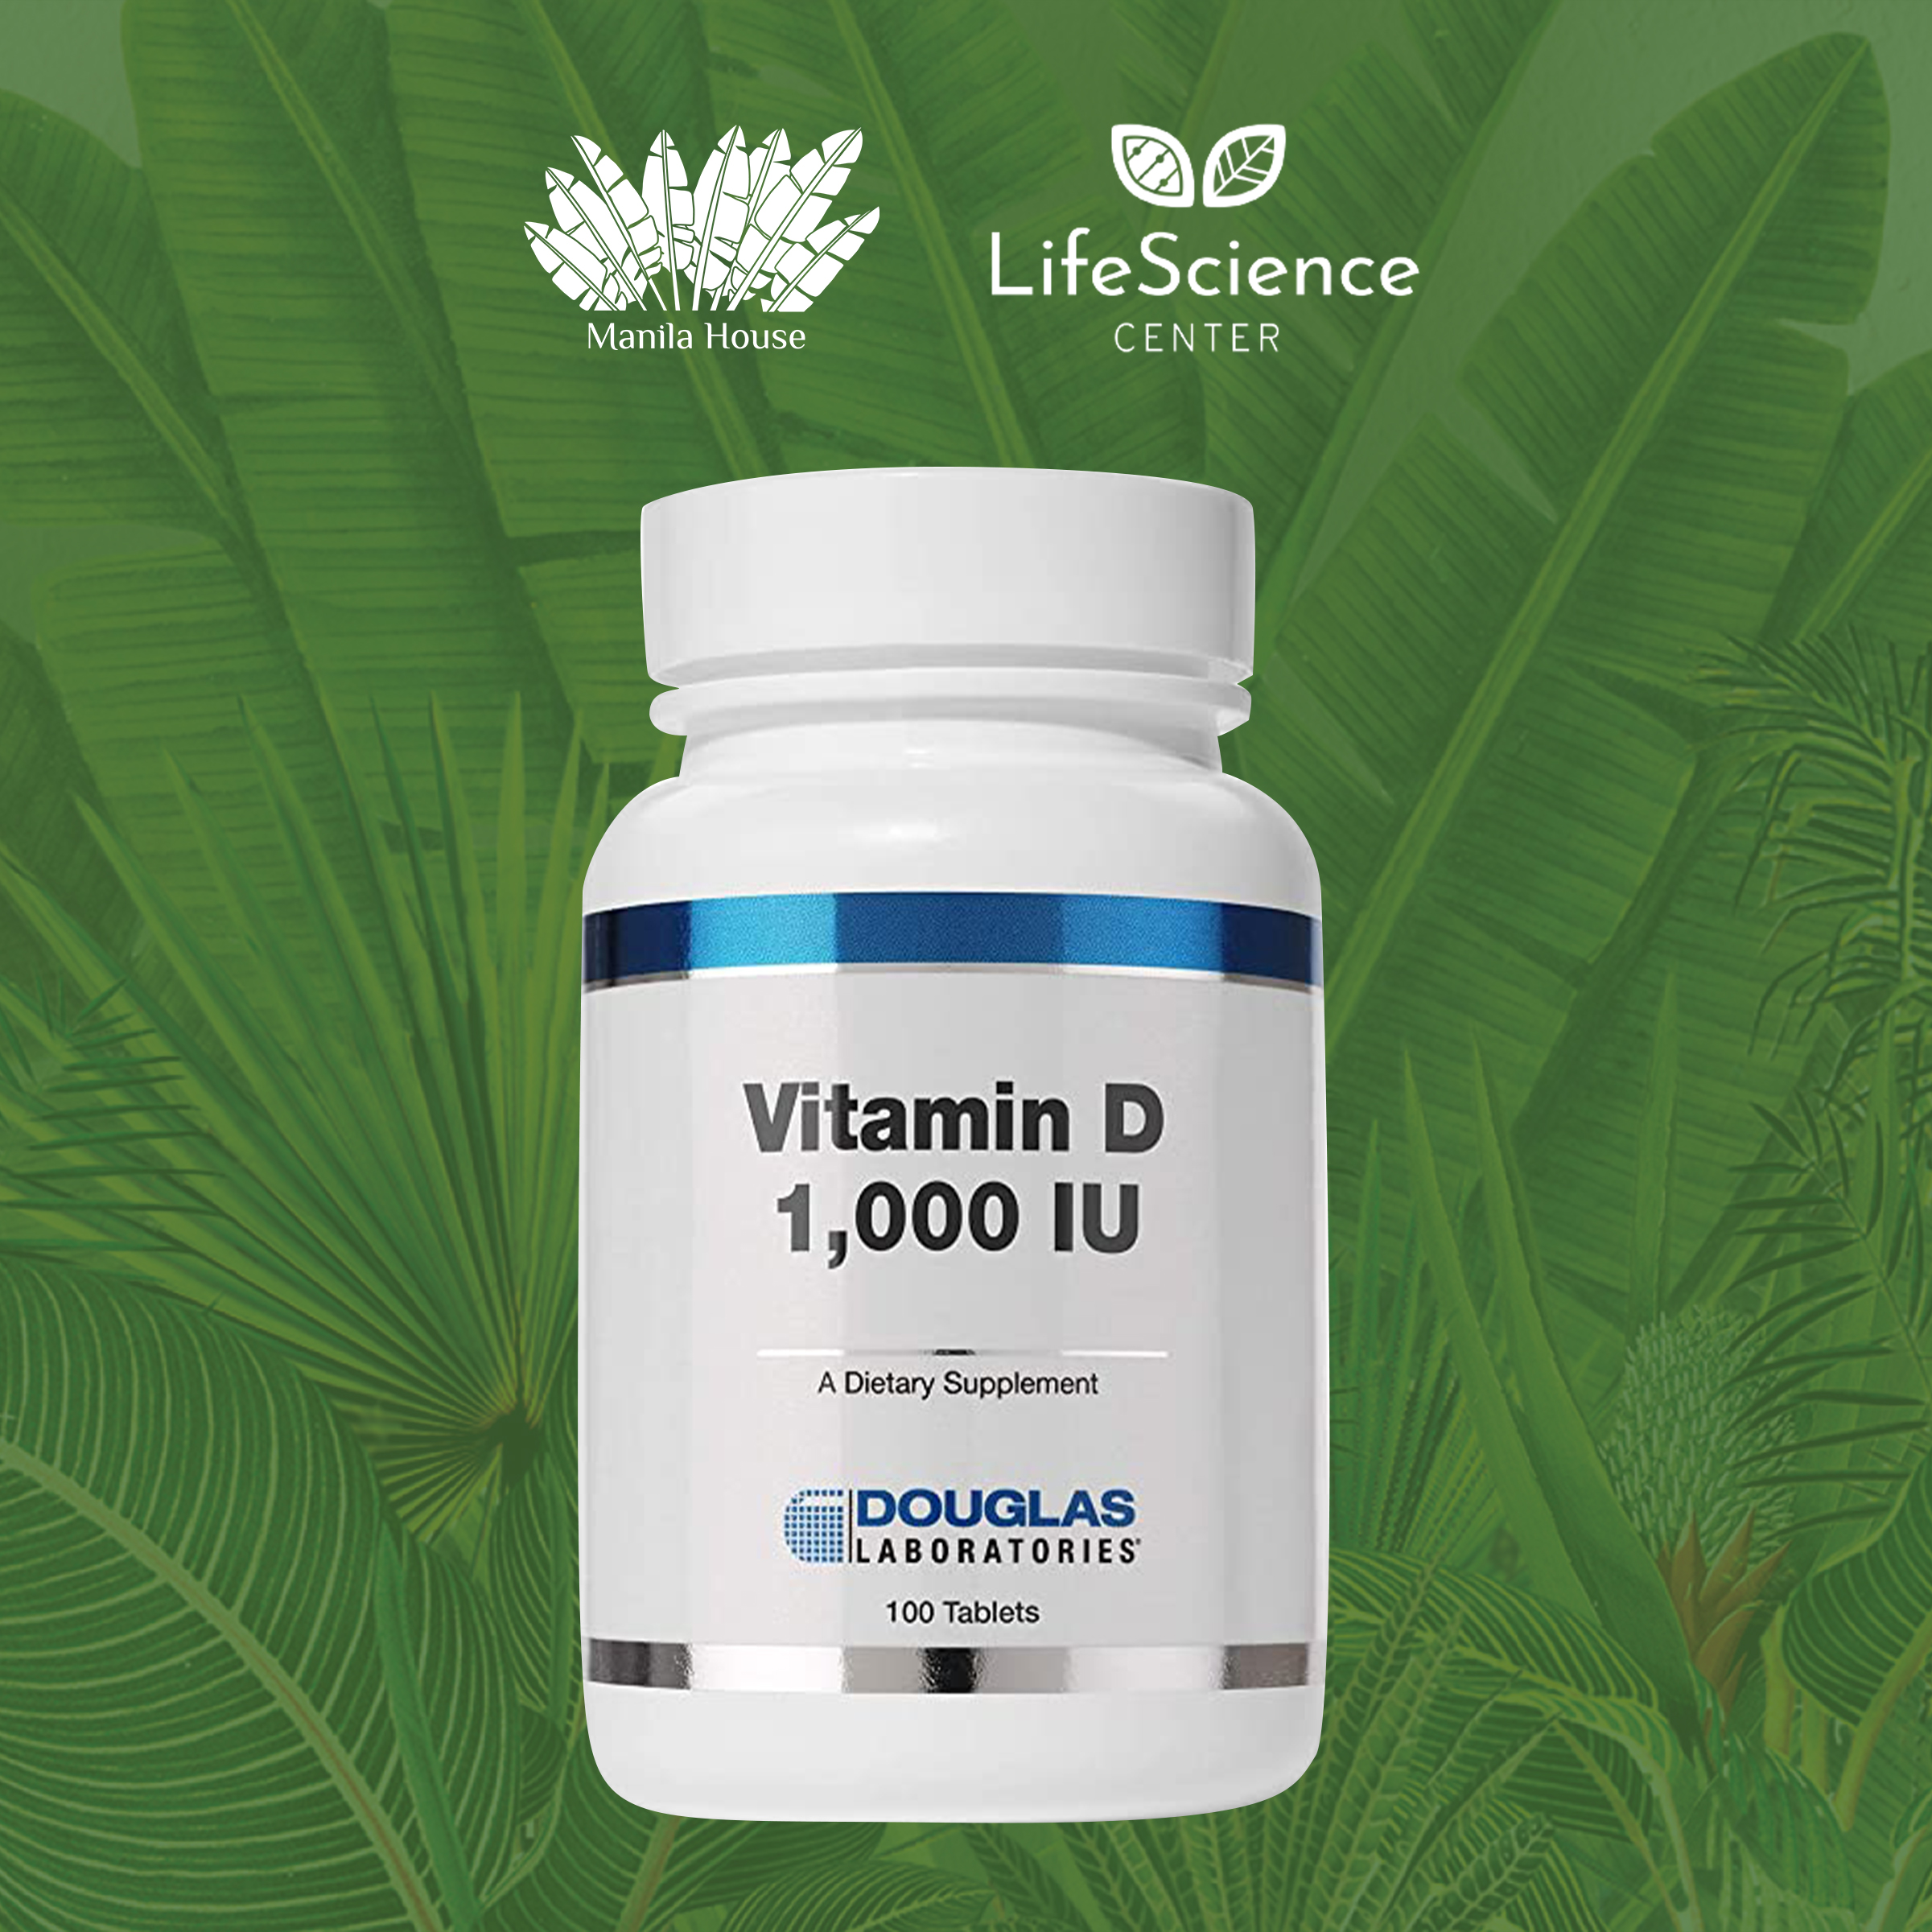 Douglas Laboratories Vitamin D3 1000IU for Sale from the Retail Shop of Manila House Private Club Inc